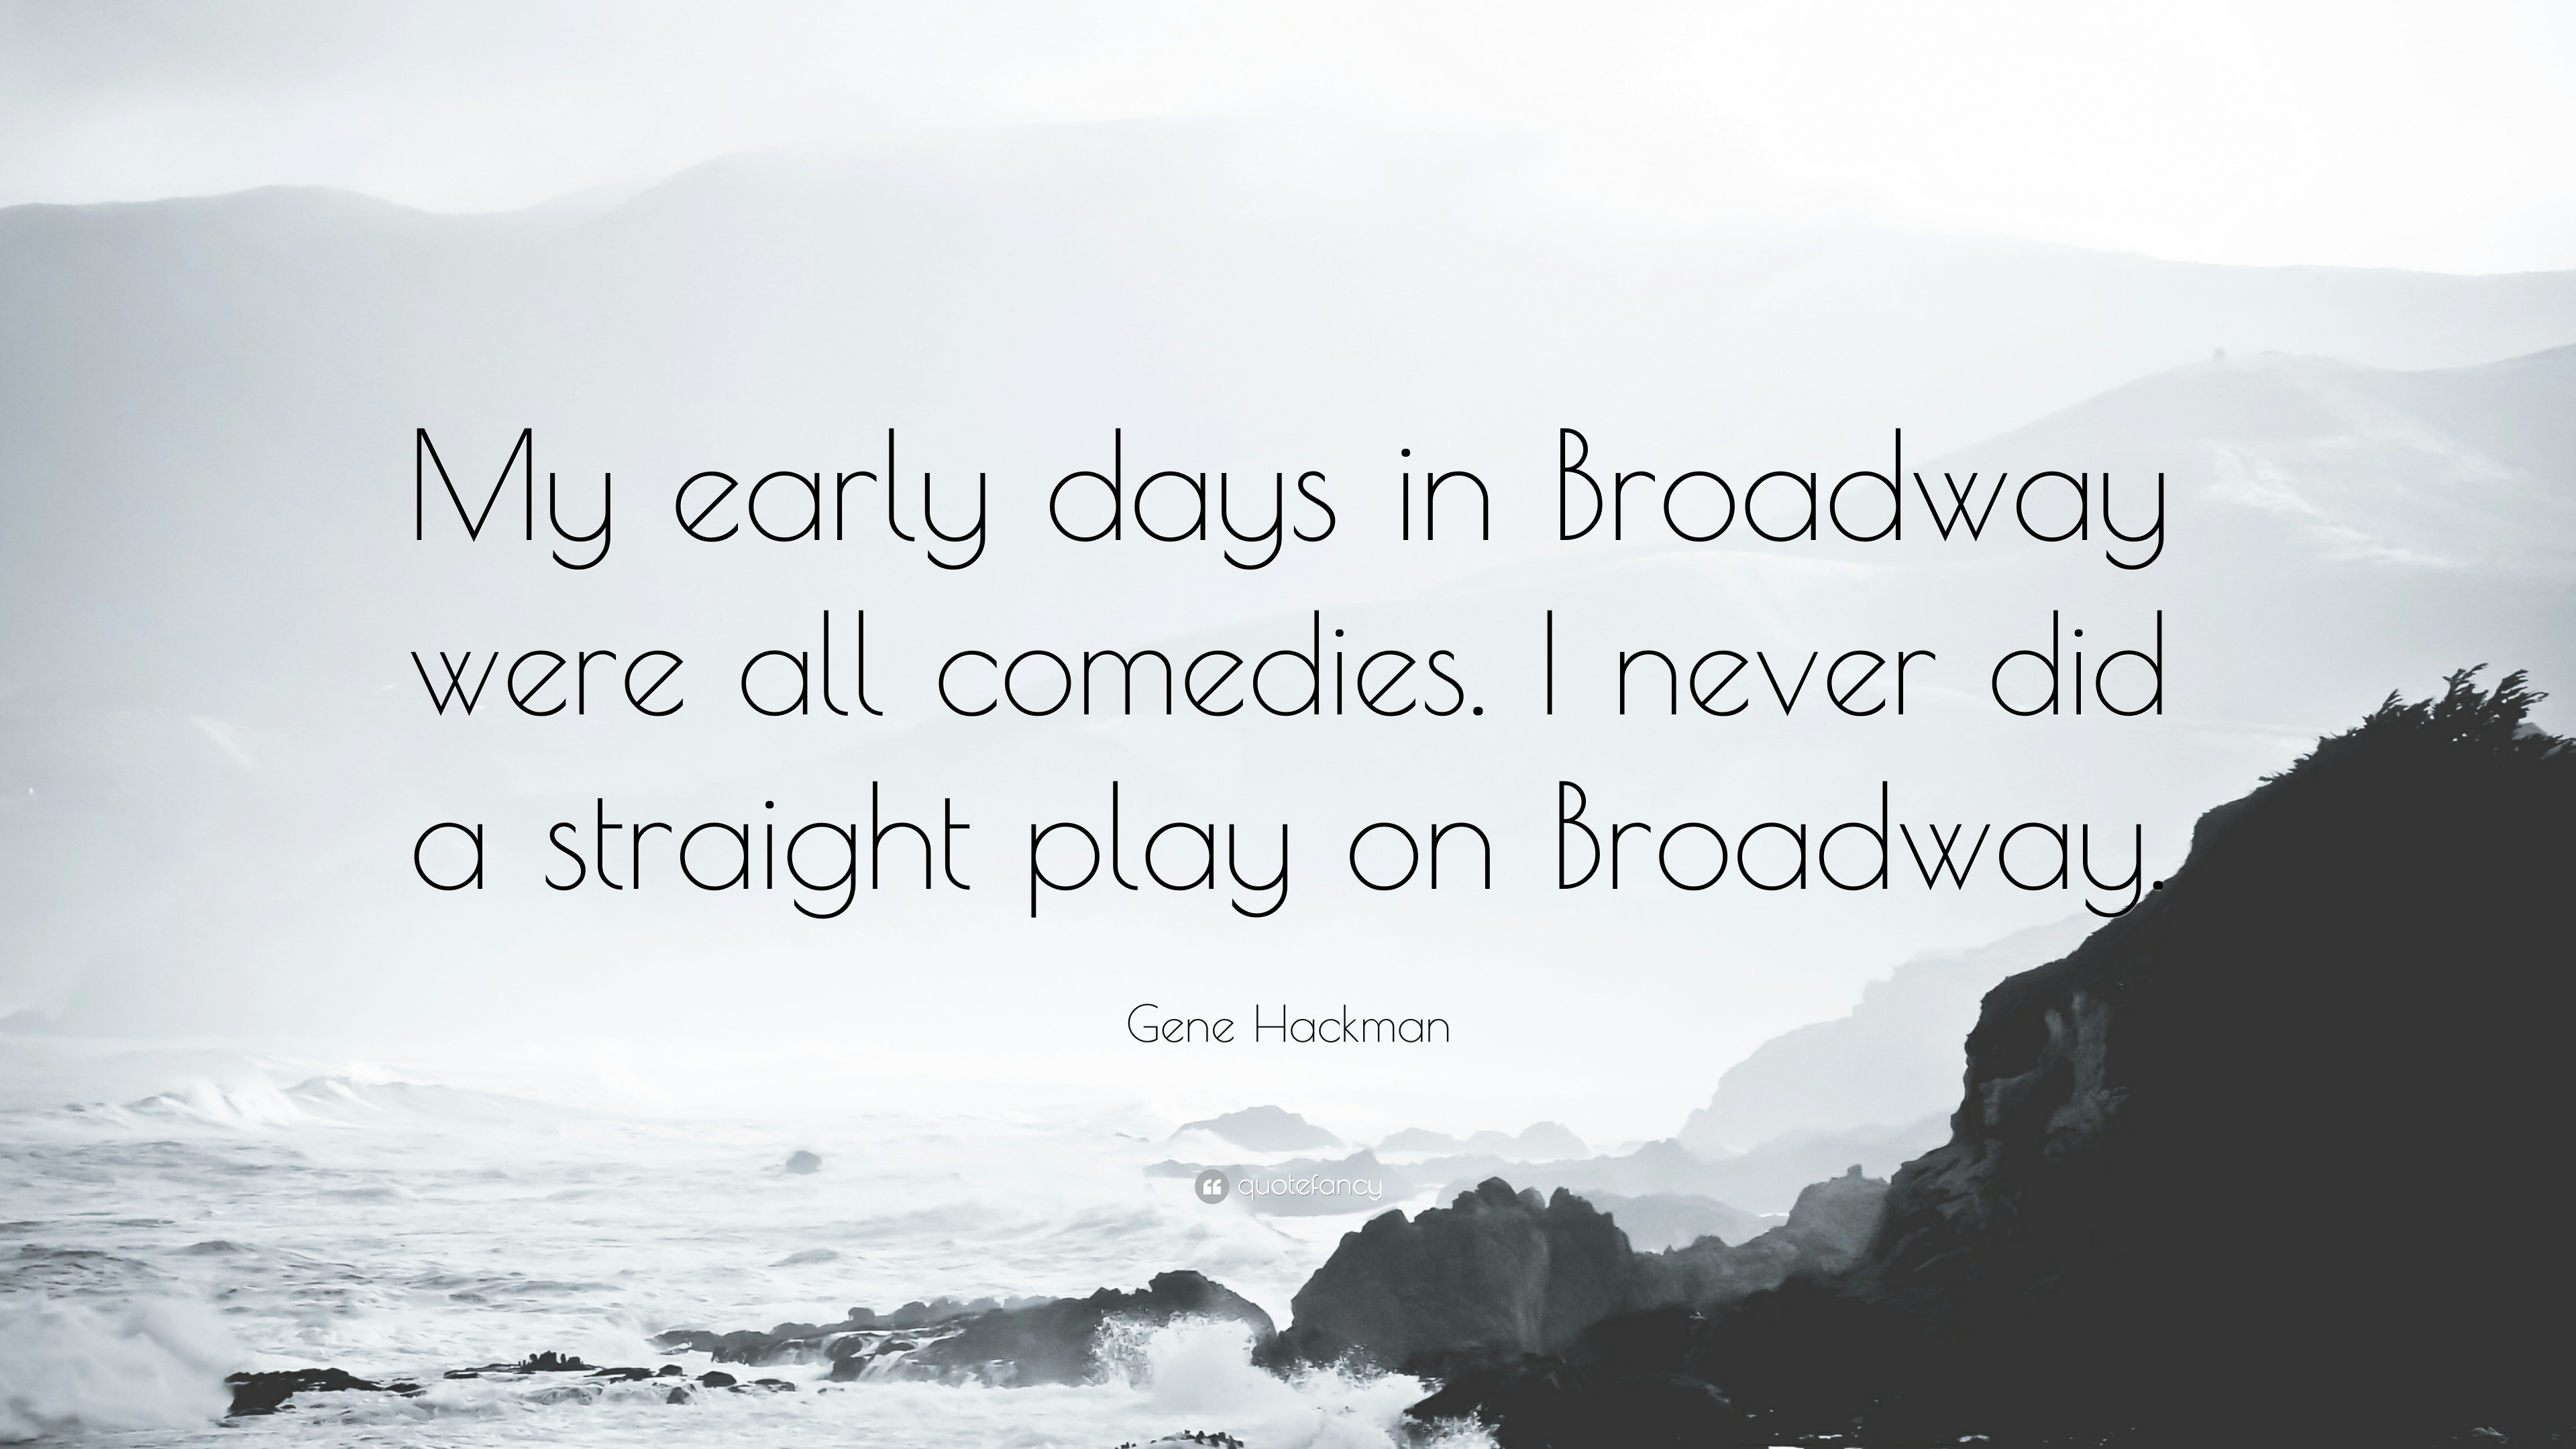 Gene Hackman Quote: “My early days in Broadway were all comedies. I